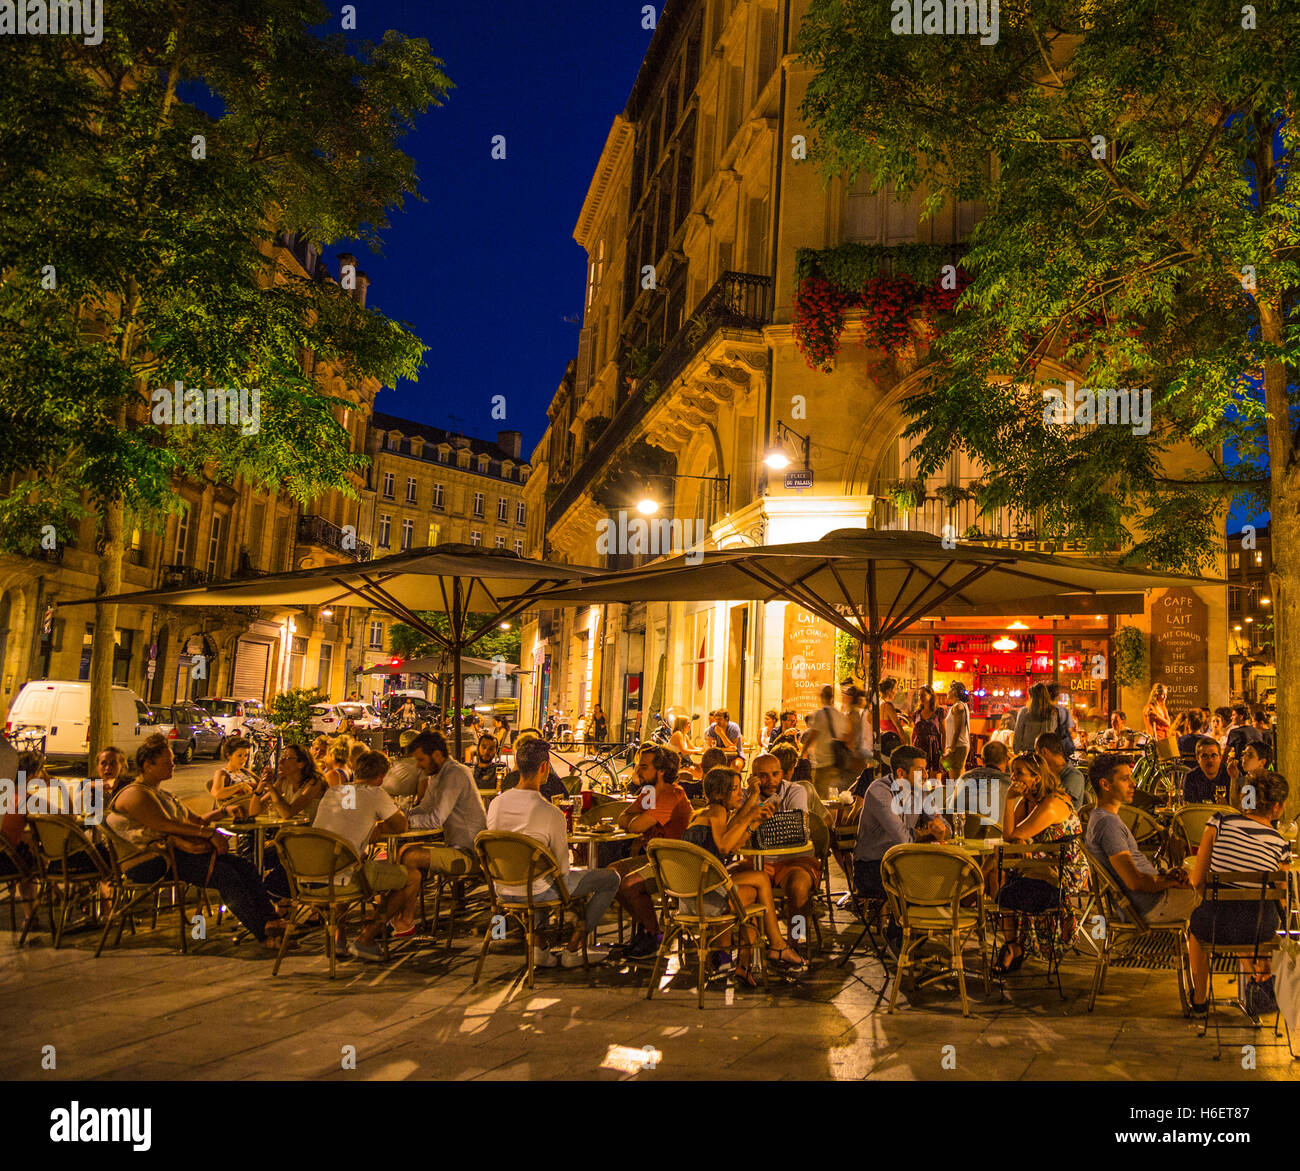 A street corner cafe in Bordeaux at night Stock Photo